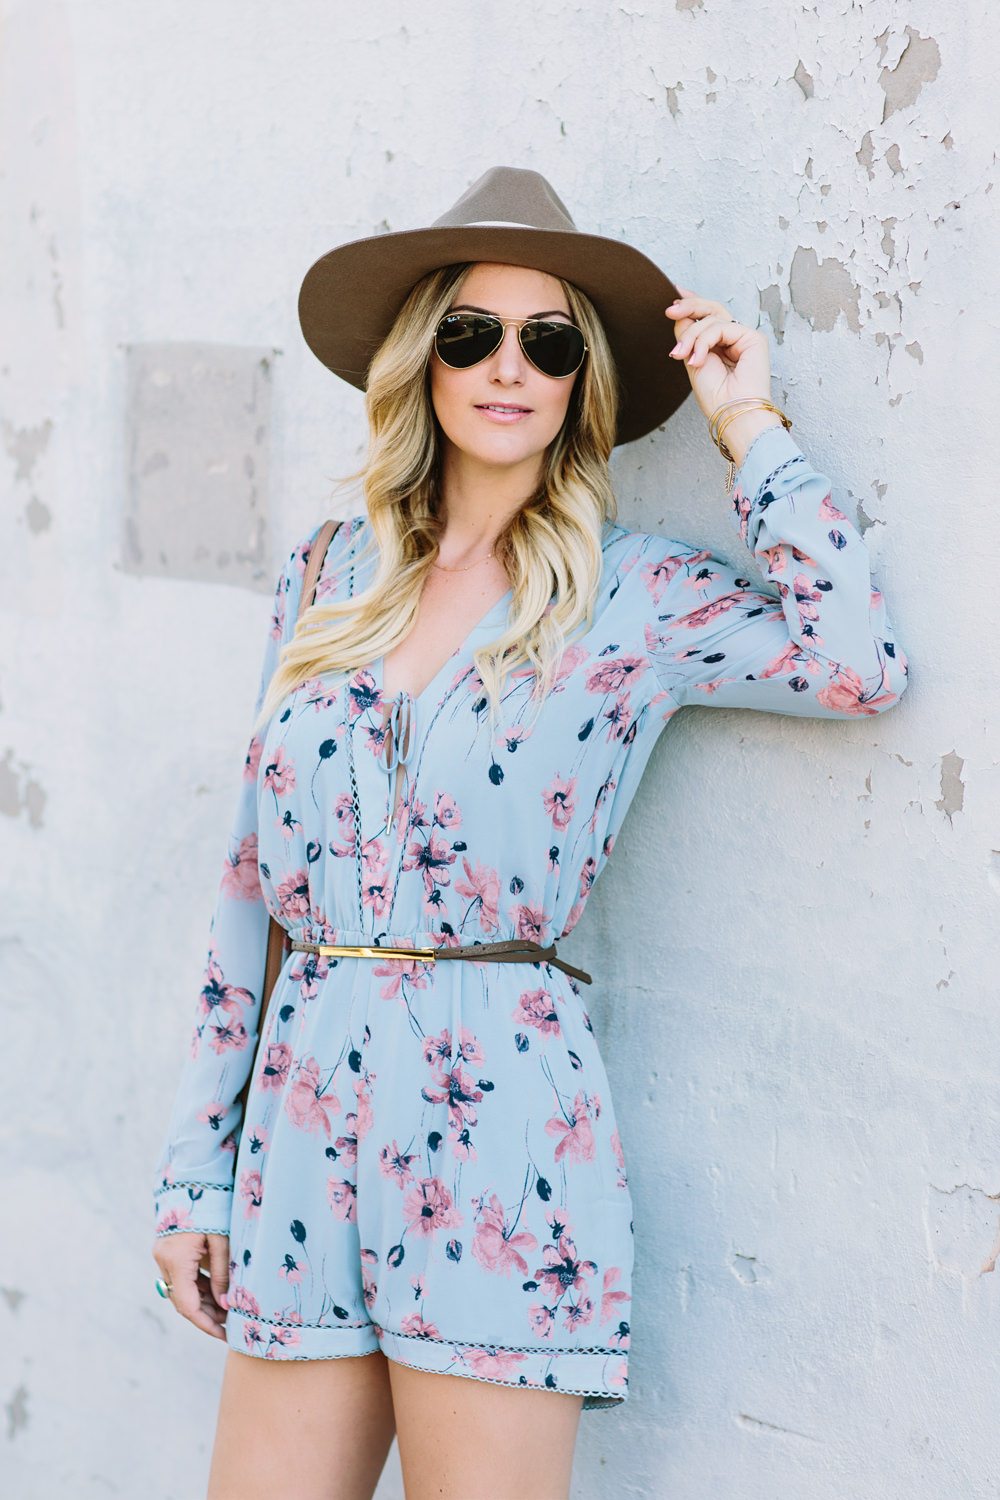 Dash of Darling styles a House of Harlow 1961 blue floral romper from Revolve with a Hat Attack felt fedora, a b-low the belt. rayban sunglasses and a Gucci Soho Disco bag for a bohemian summer outfit.